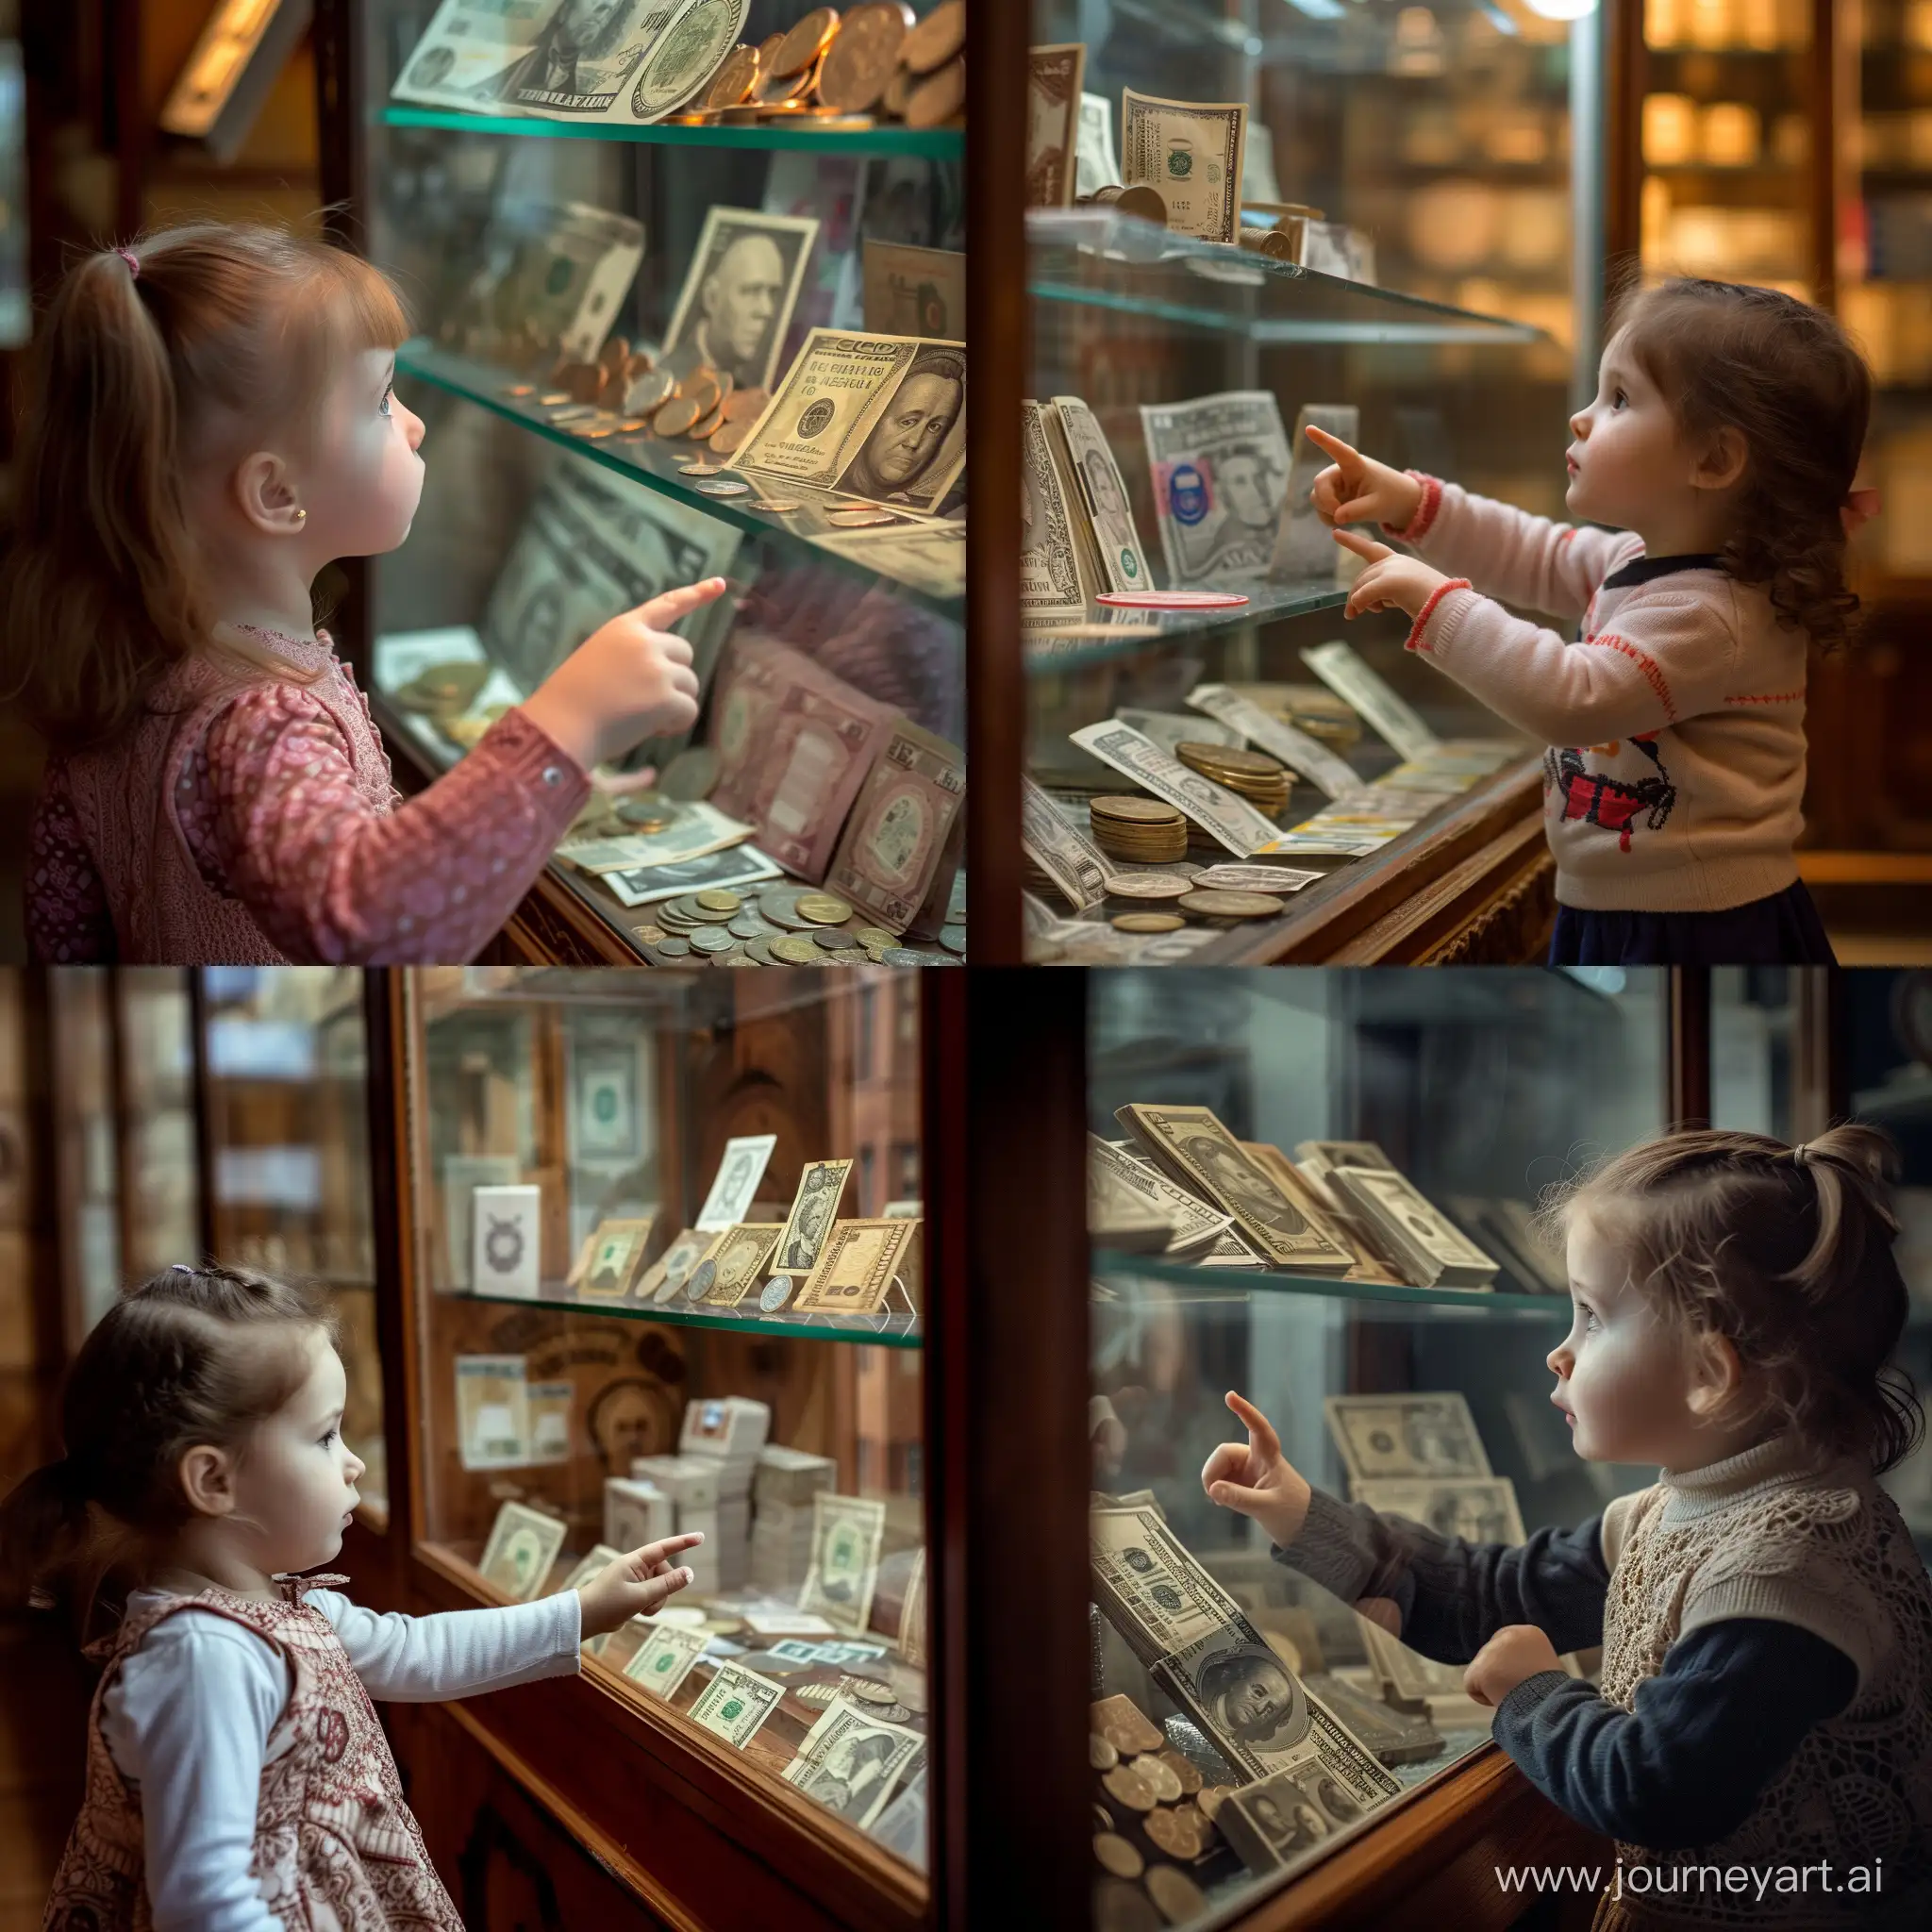 Curious-Girl-Exploring-Diverse-Currency-Exhibits-in-HighResolution-Museum-Display